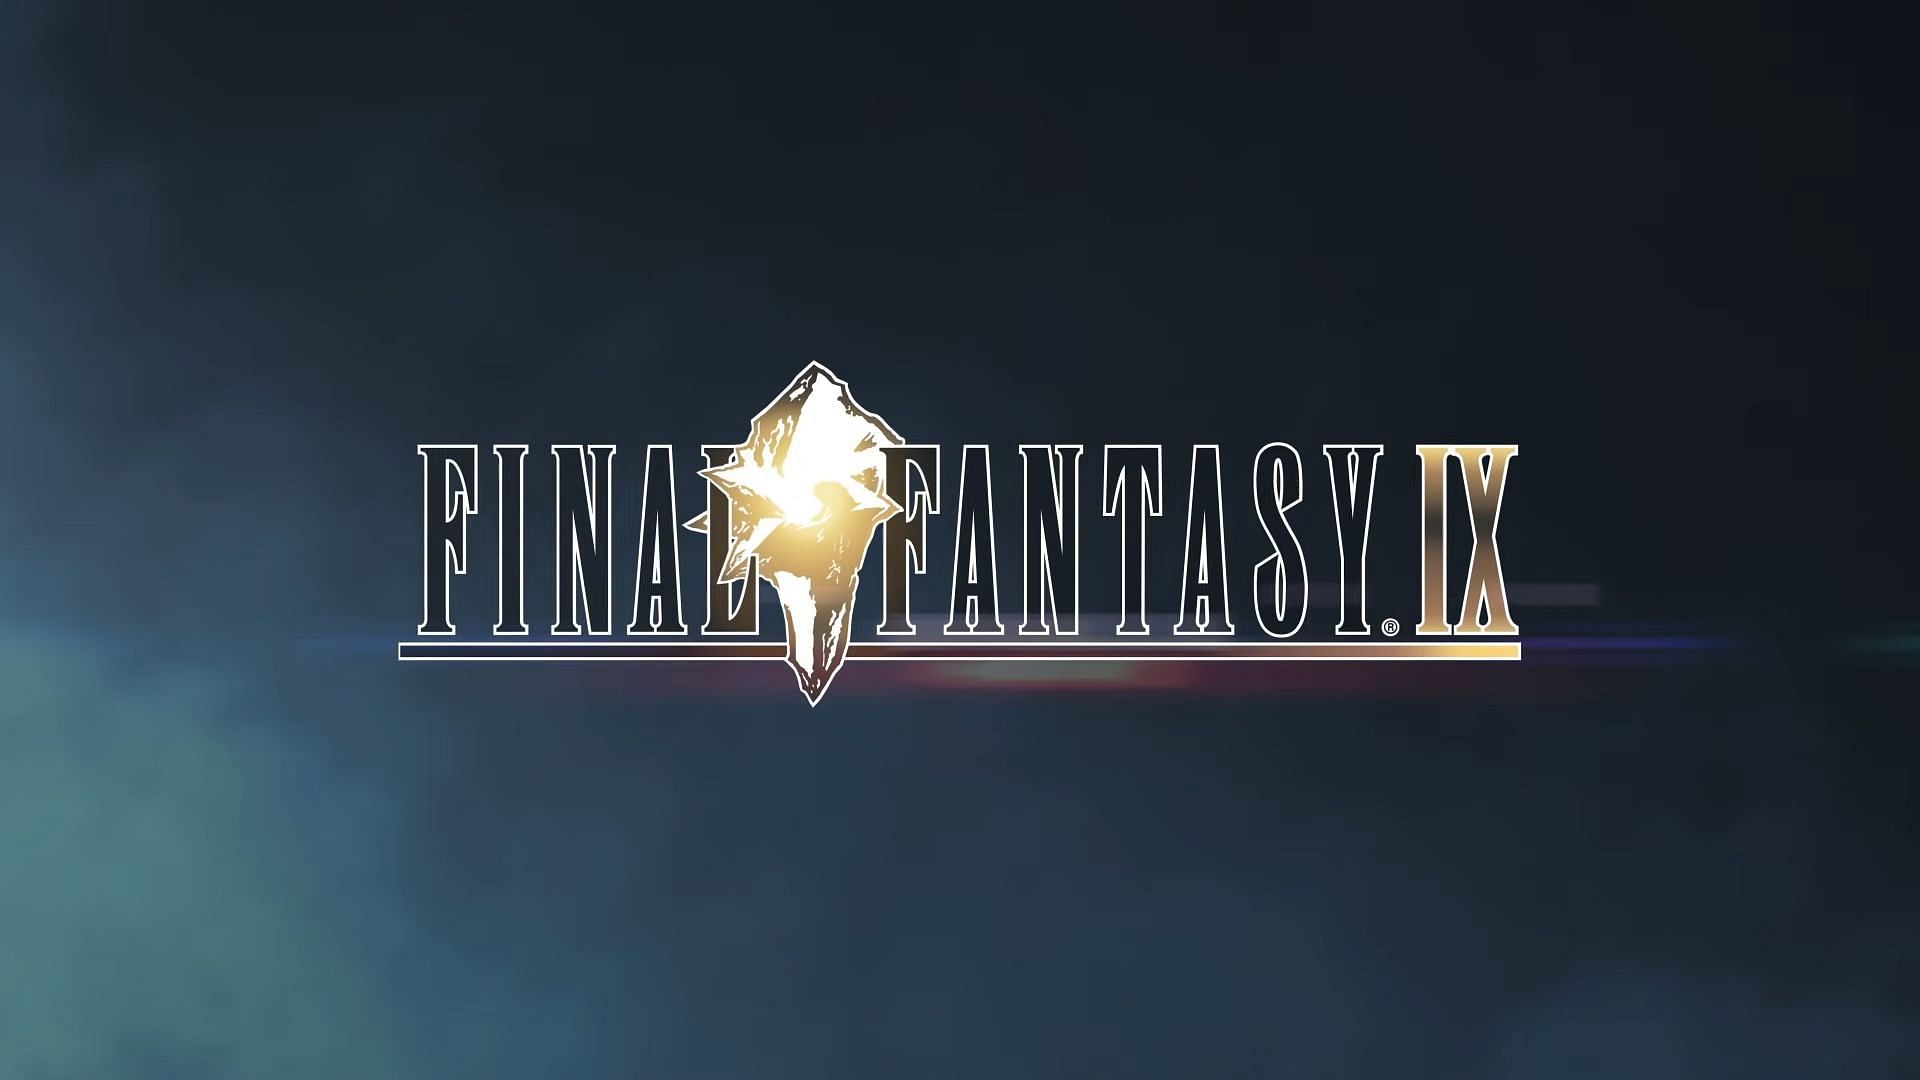 The Final Fantasy IX remake may receive a formal announcement. (Image via Square Enix)